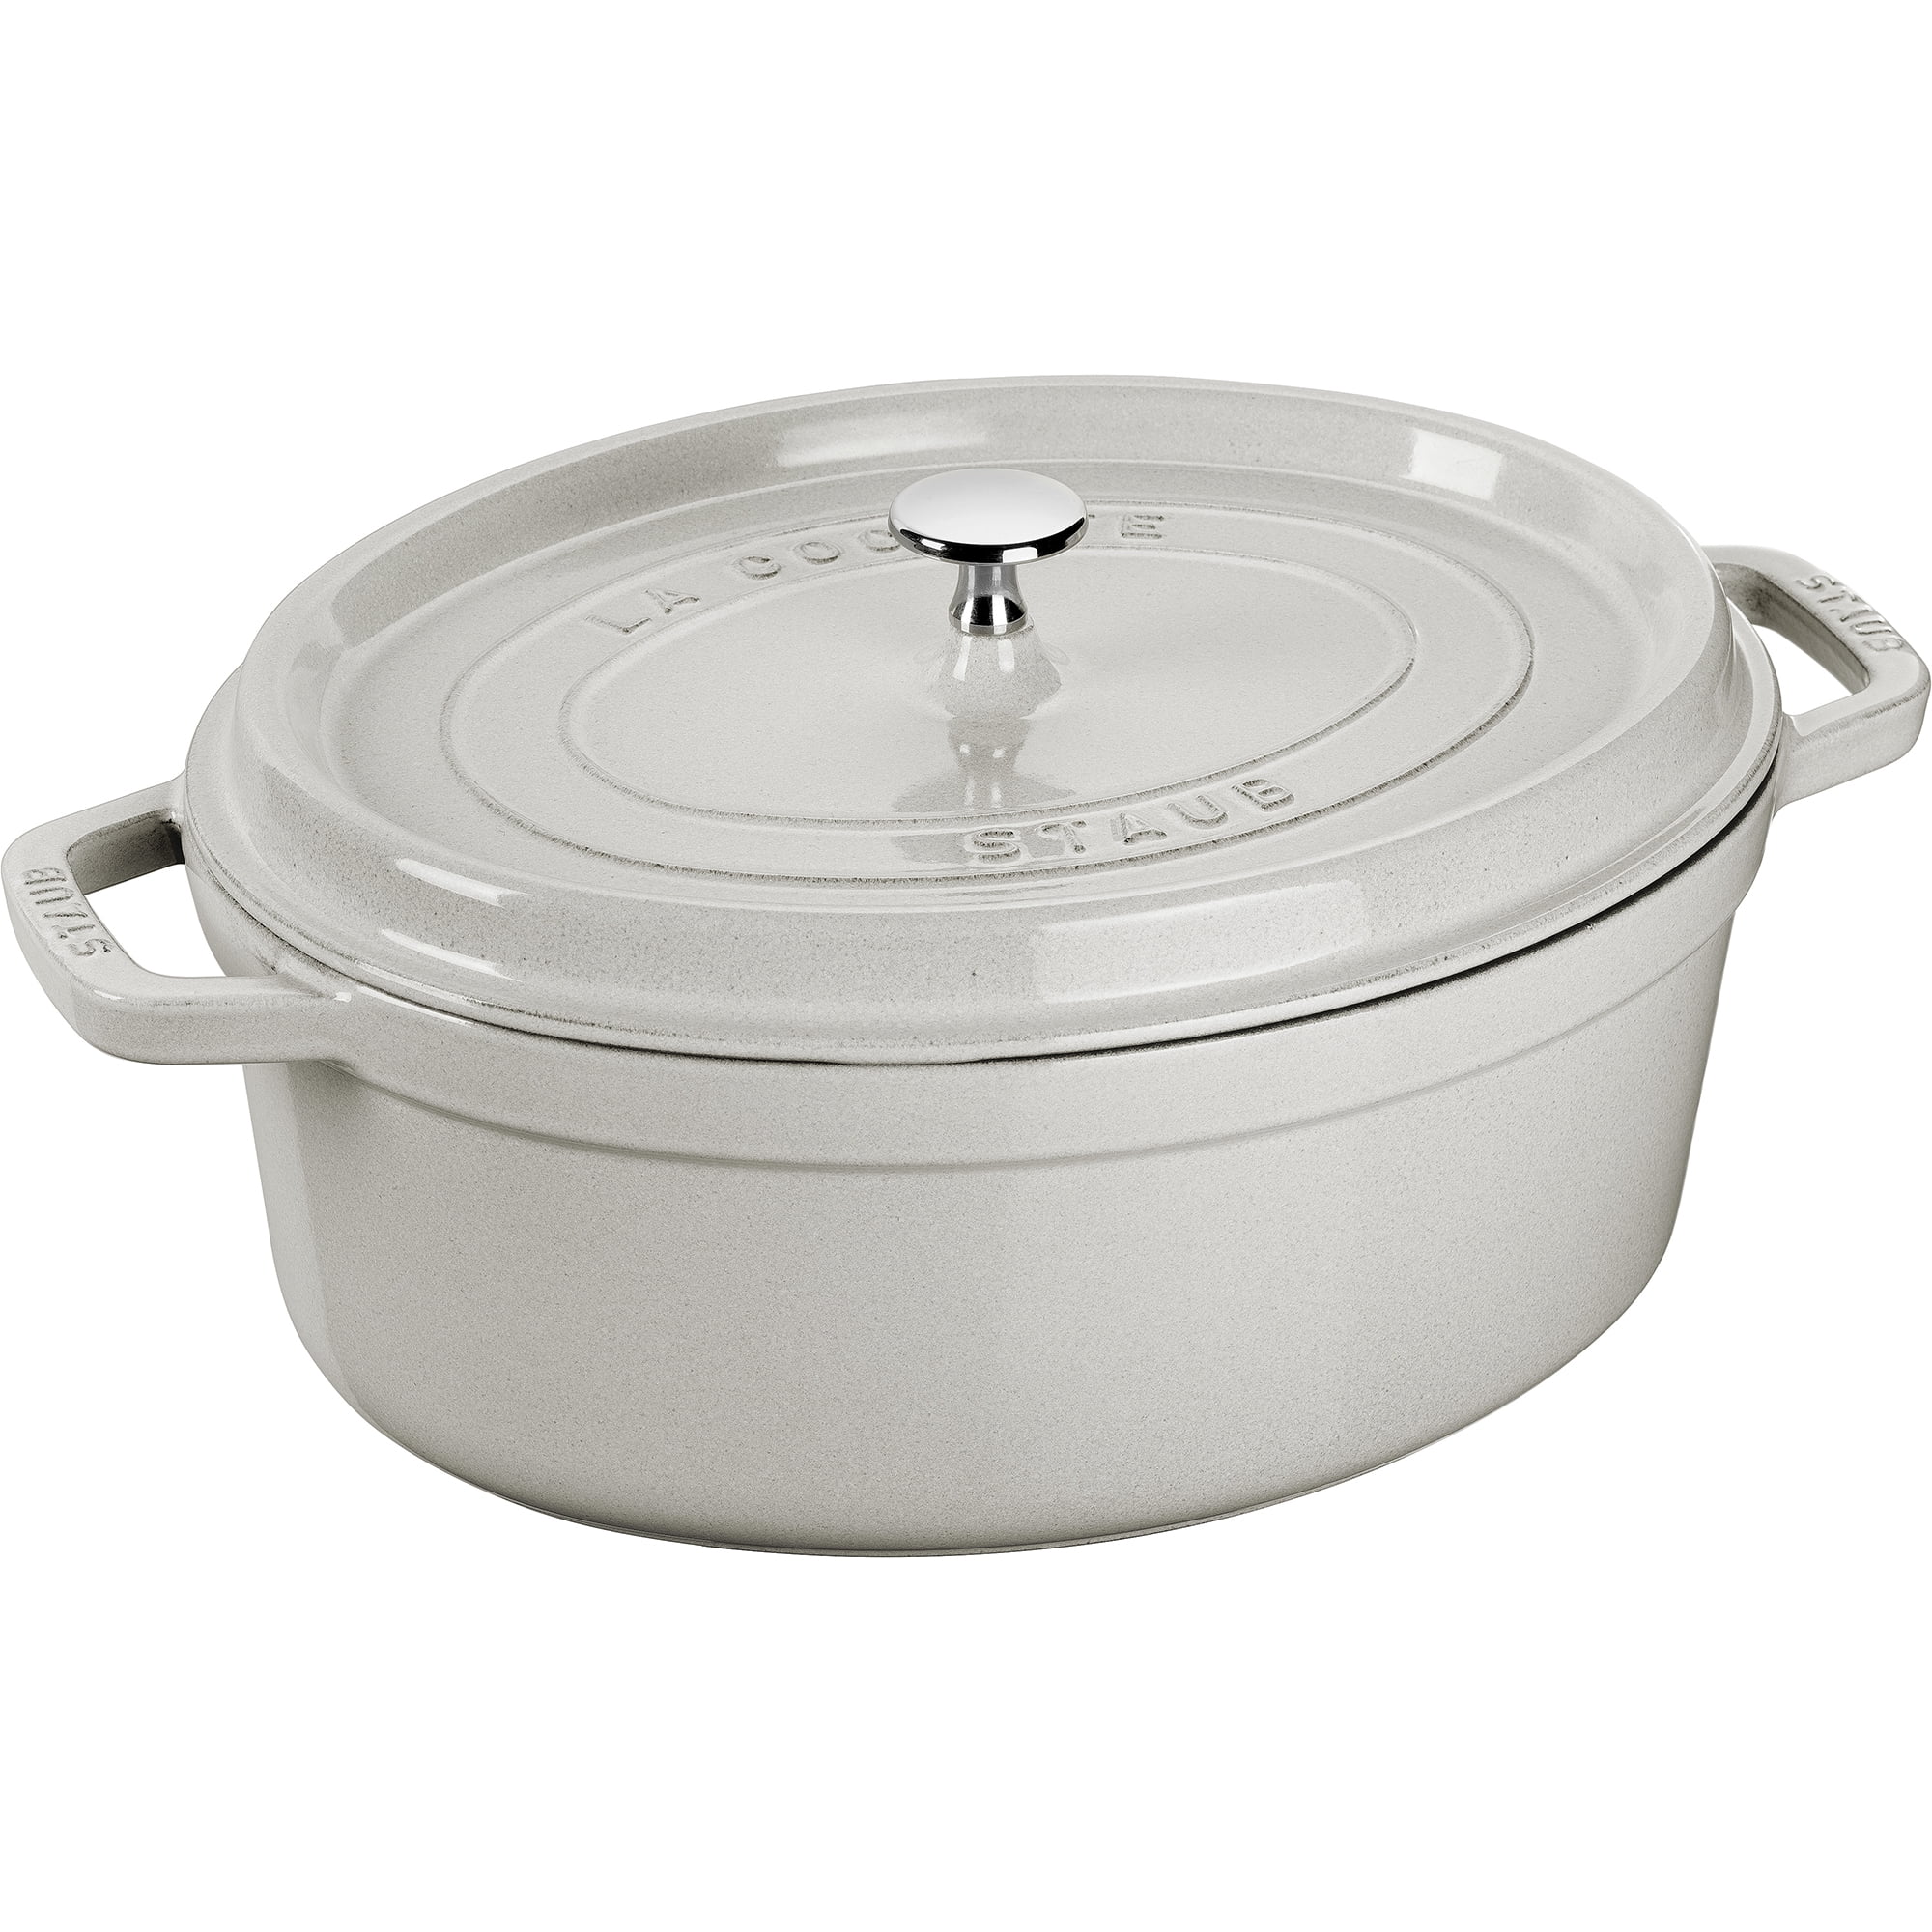 Staub Cast Iron Oval Cocotte, Dutch Oven, 5.75-quart, serves 5-6, Made in  France, White Truffle 